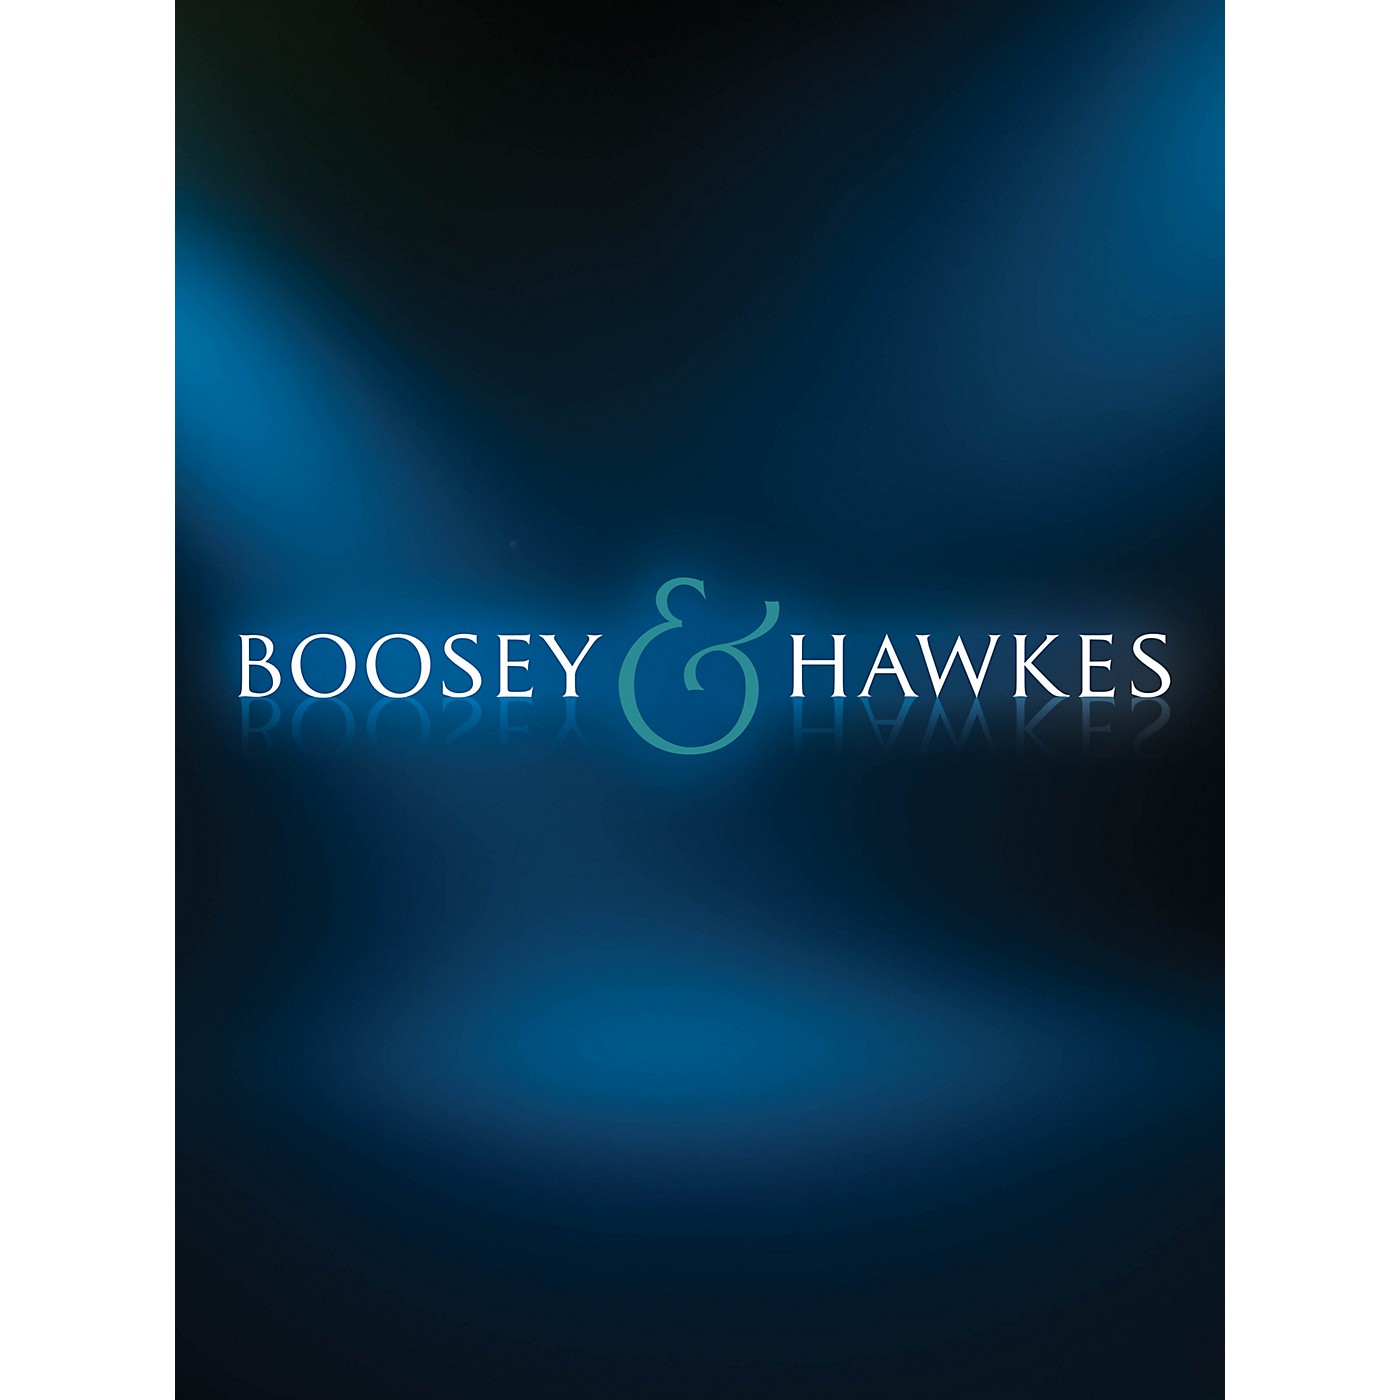 Boosey and Hawkes Piano Concerto No. 2 in G Minor, Op. 16 (Score) Boosey & Hawkes Scores/Books Series by Sergei Prokofieff thumbnail